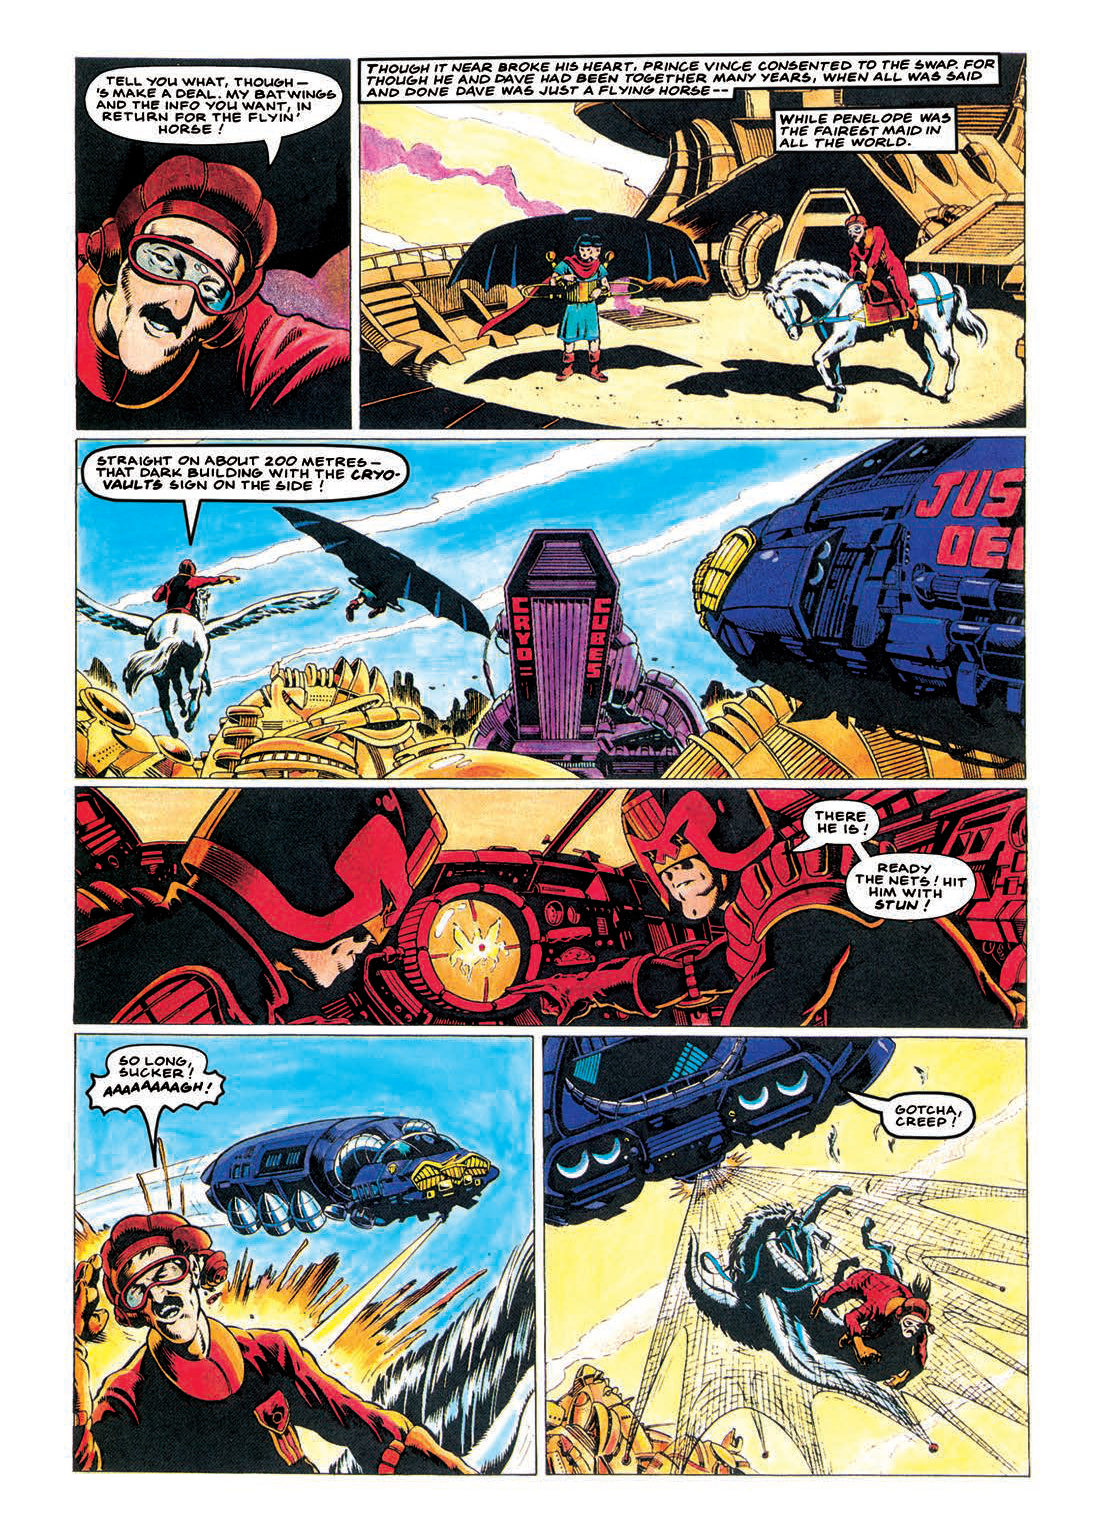 Read online Judge Dredd: The Restricted Files comic -  Issue # TPB 3 - 31